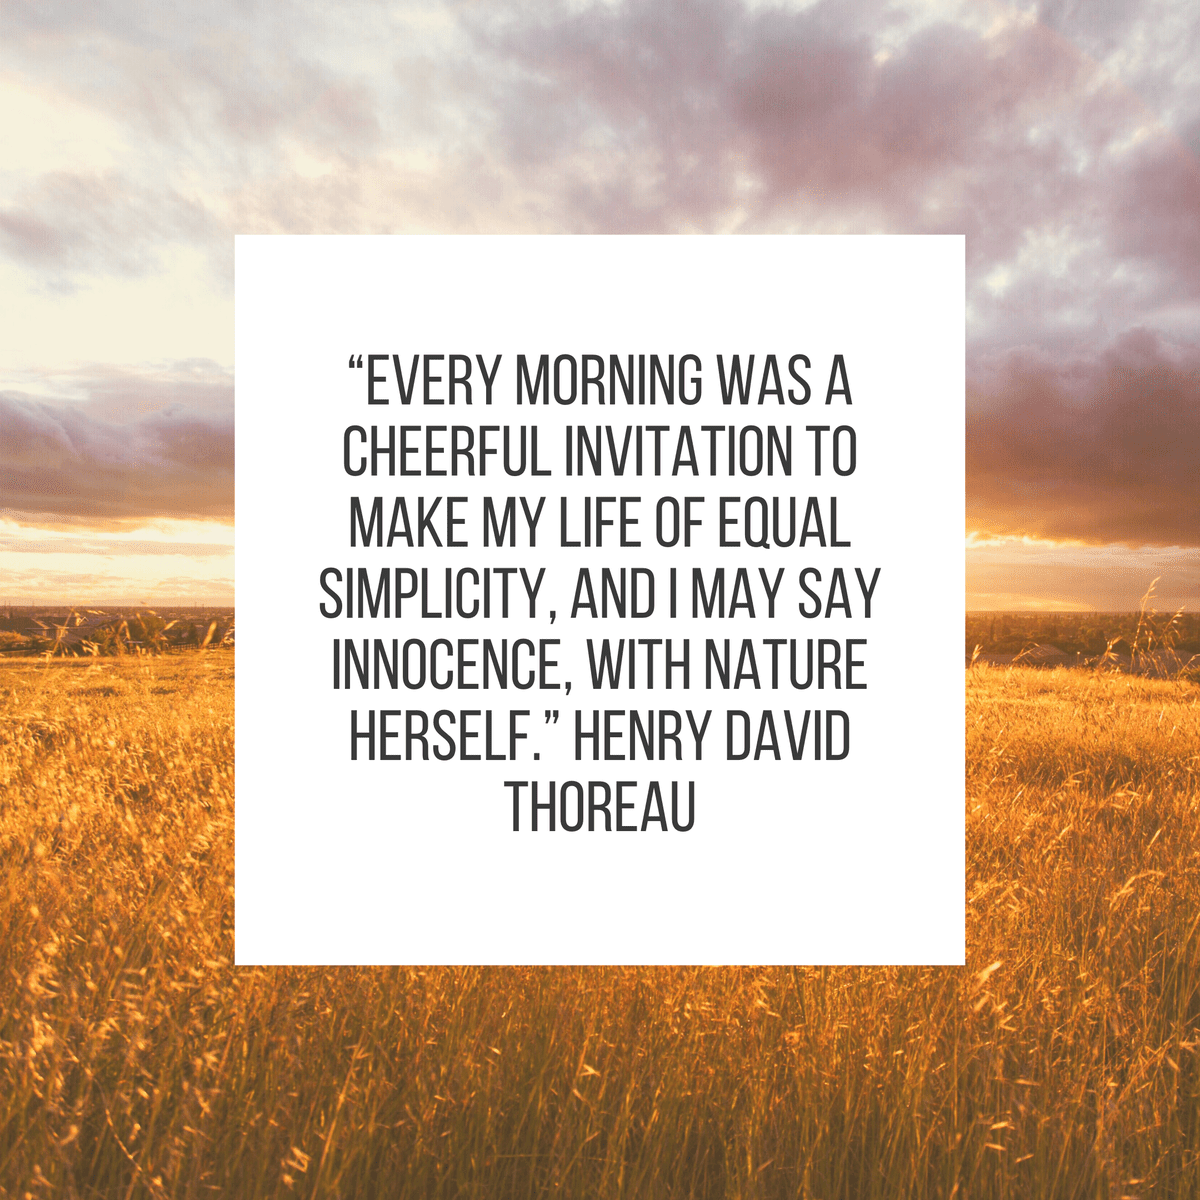 “Every morning was a cheerful invitation to make my life of equal simplicity, and I may say innocence, with Nature herself.” Henry David Thoreau